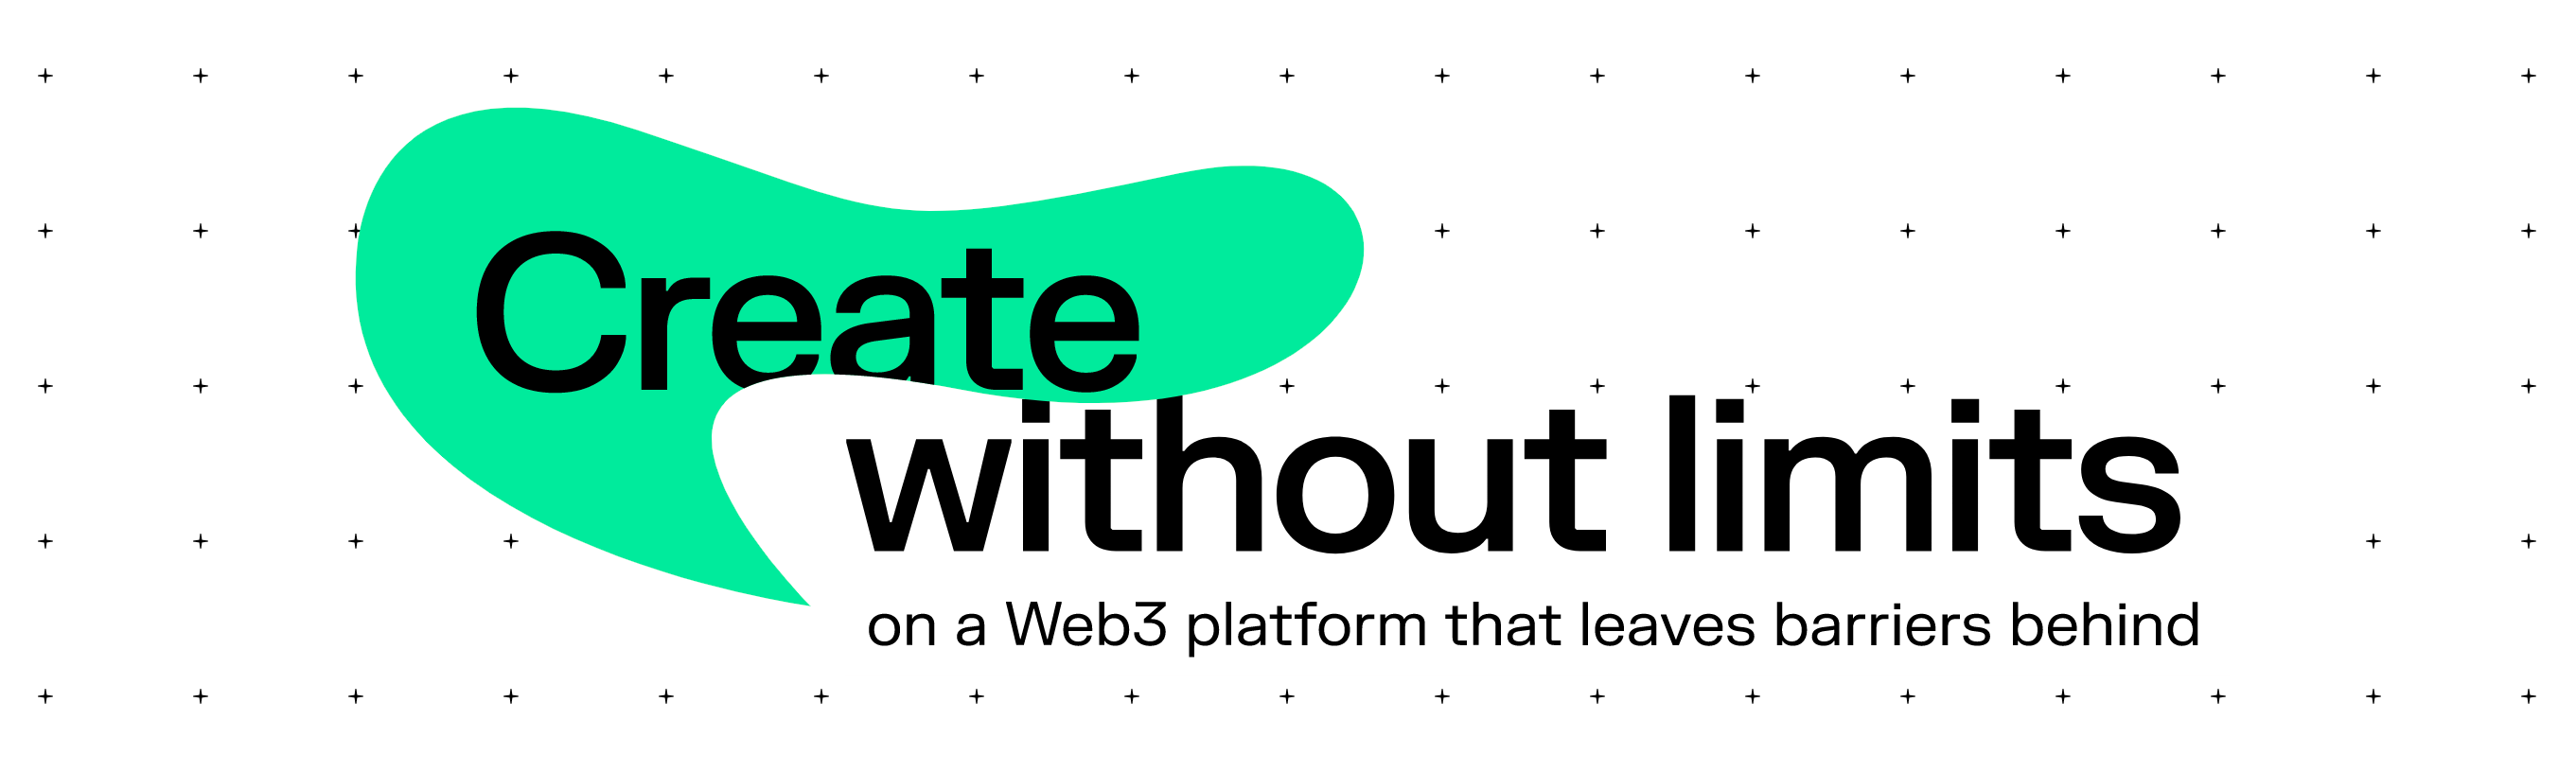 Create without limits banner from NEAR Protocol.